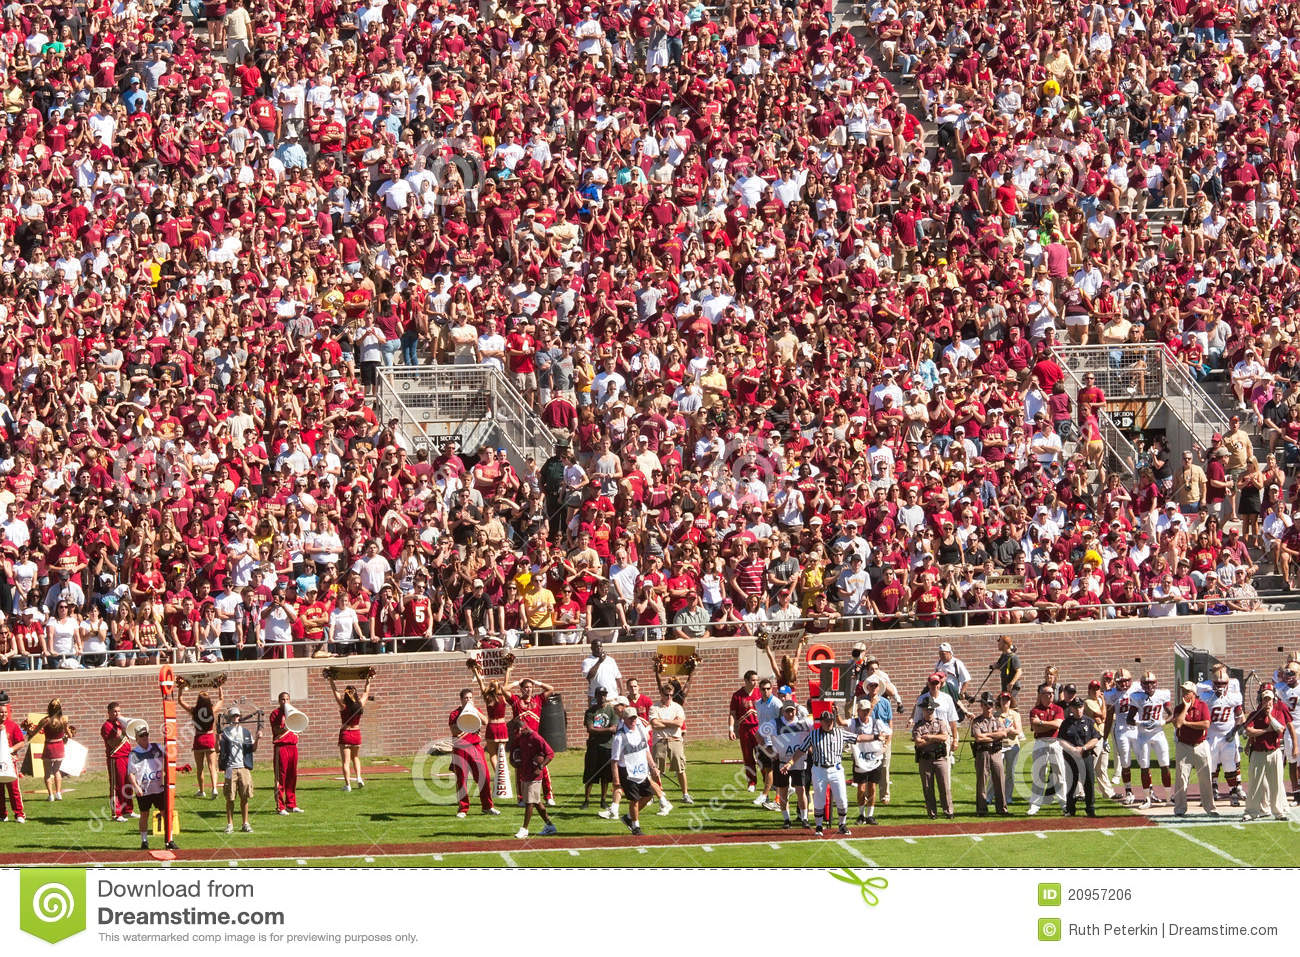 Campbell Crowd Doak Florida Football Out Sold Stadium.